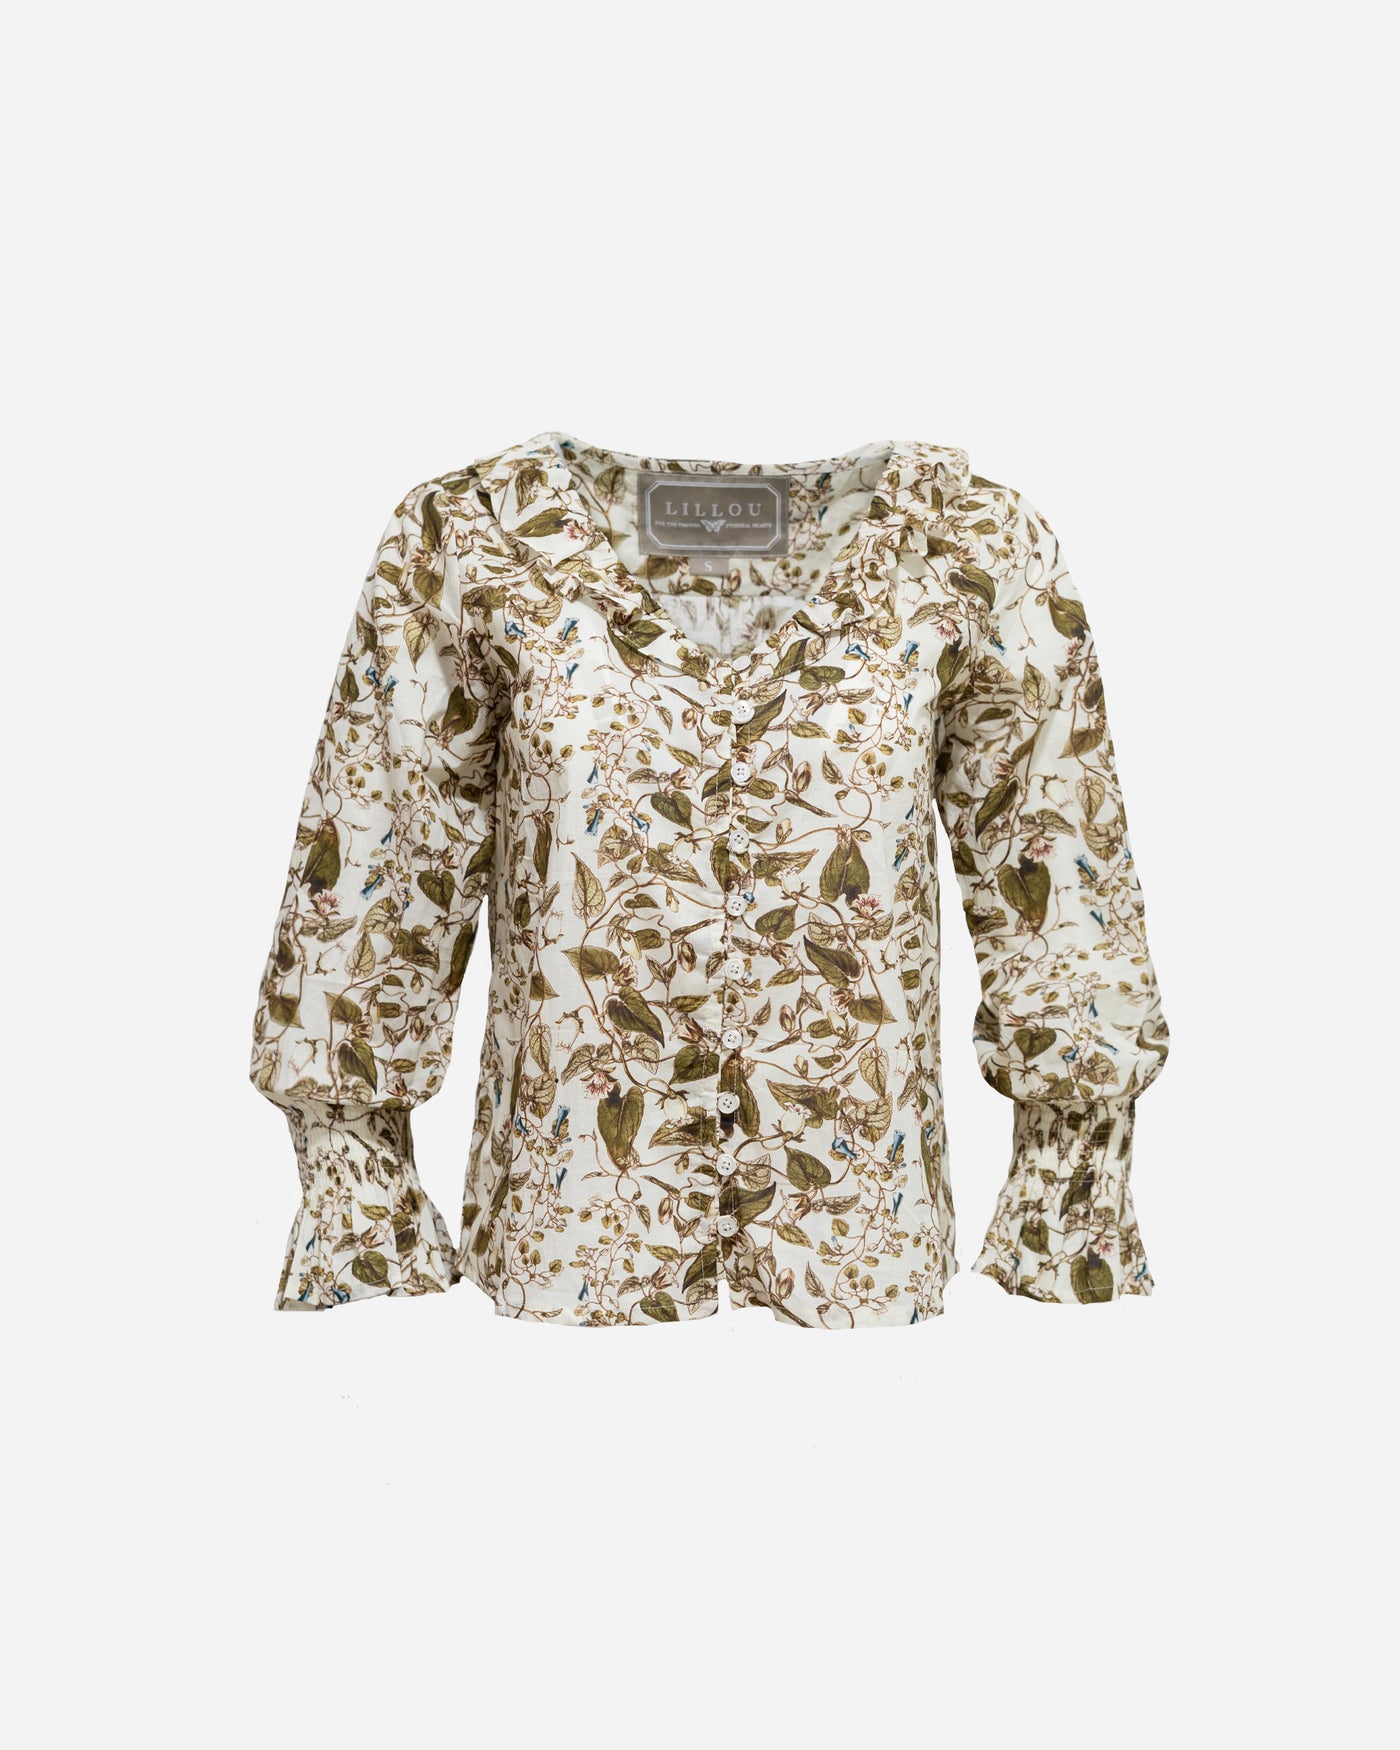 The Samantha Blouse in Golden Vines